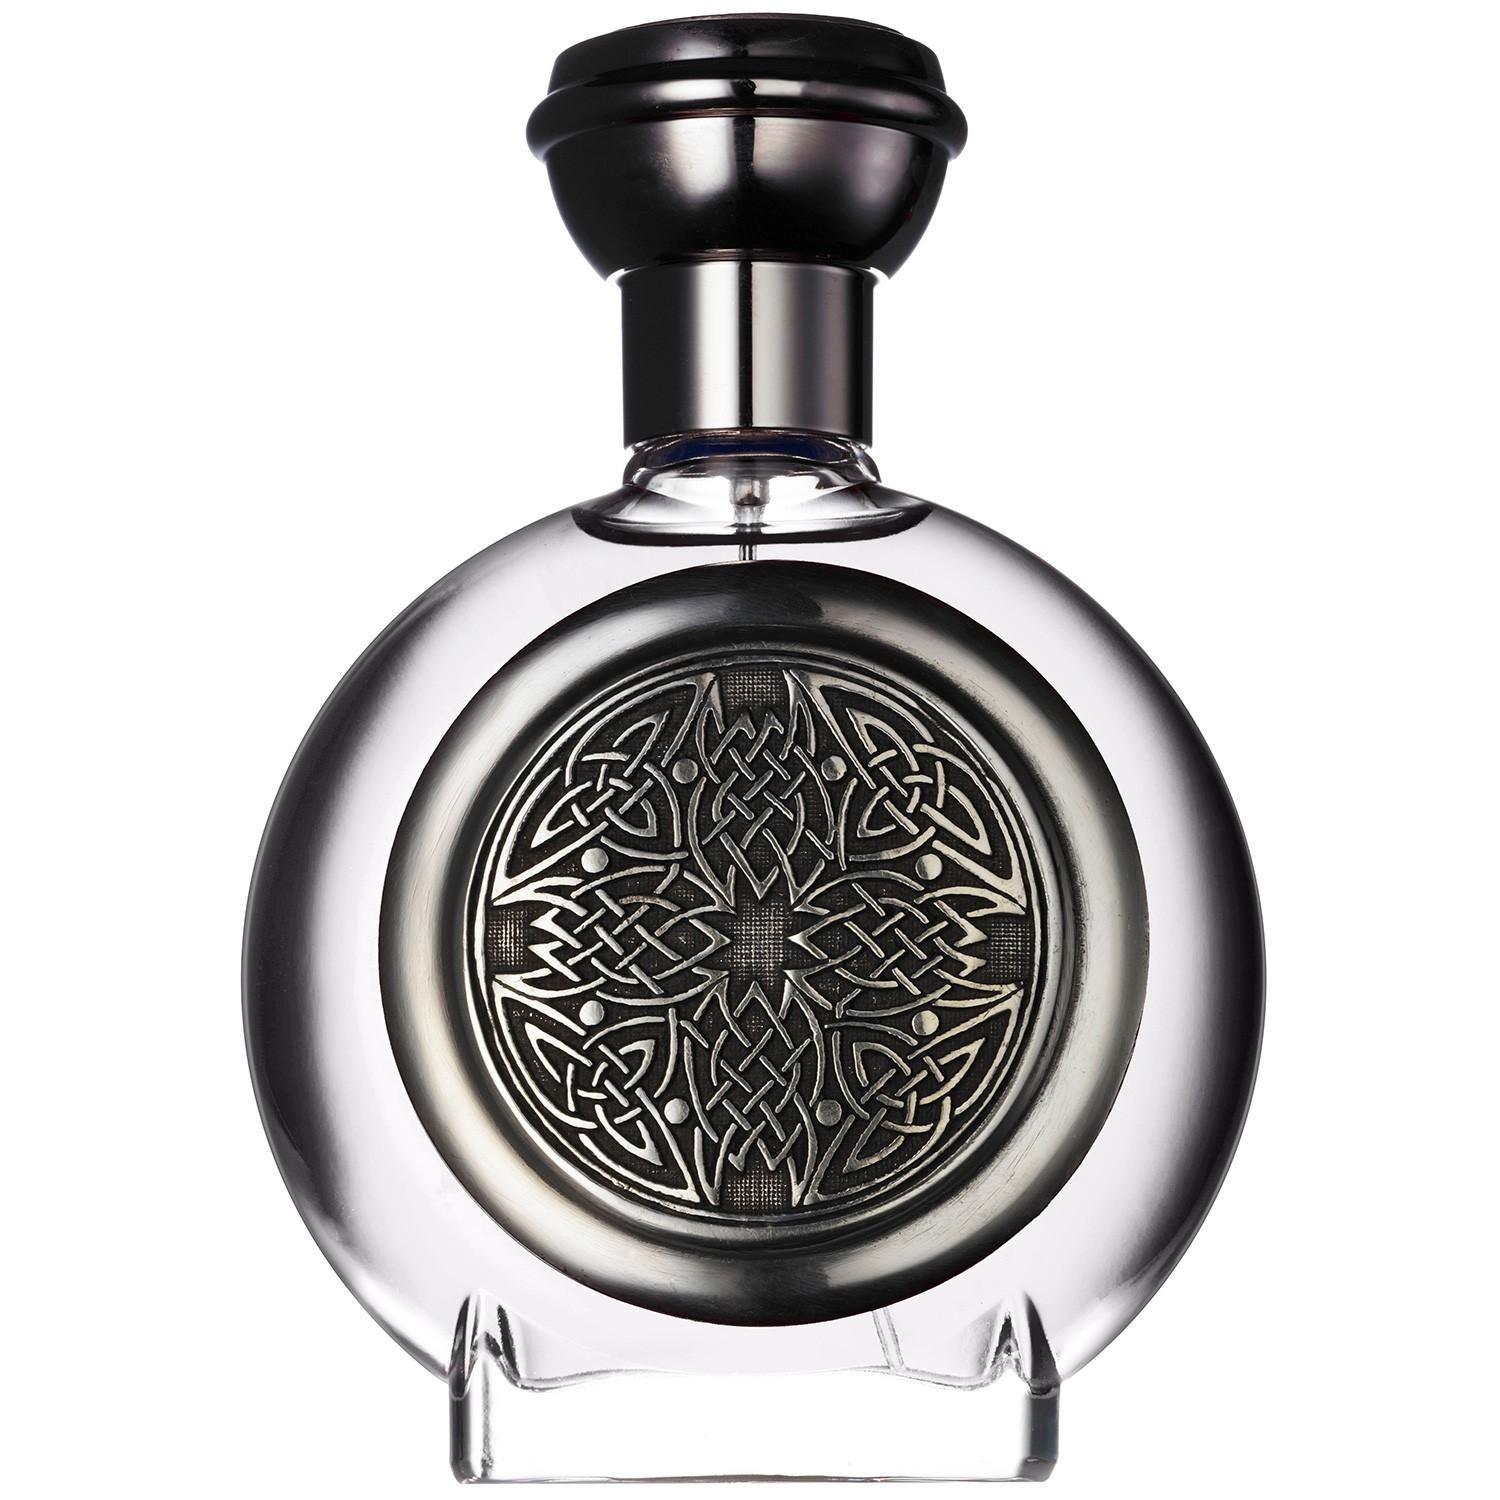 Foto Ardent Edp. 100ml. Boadicea The Victorious